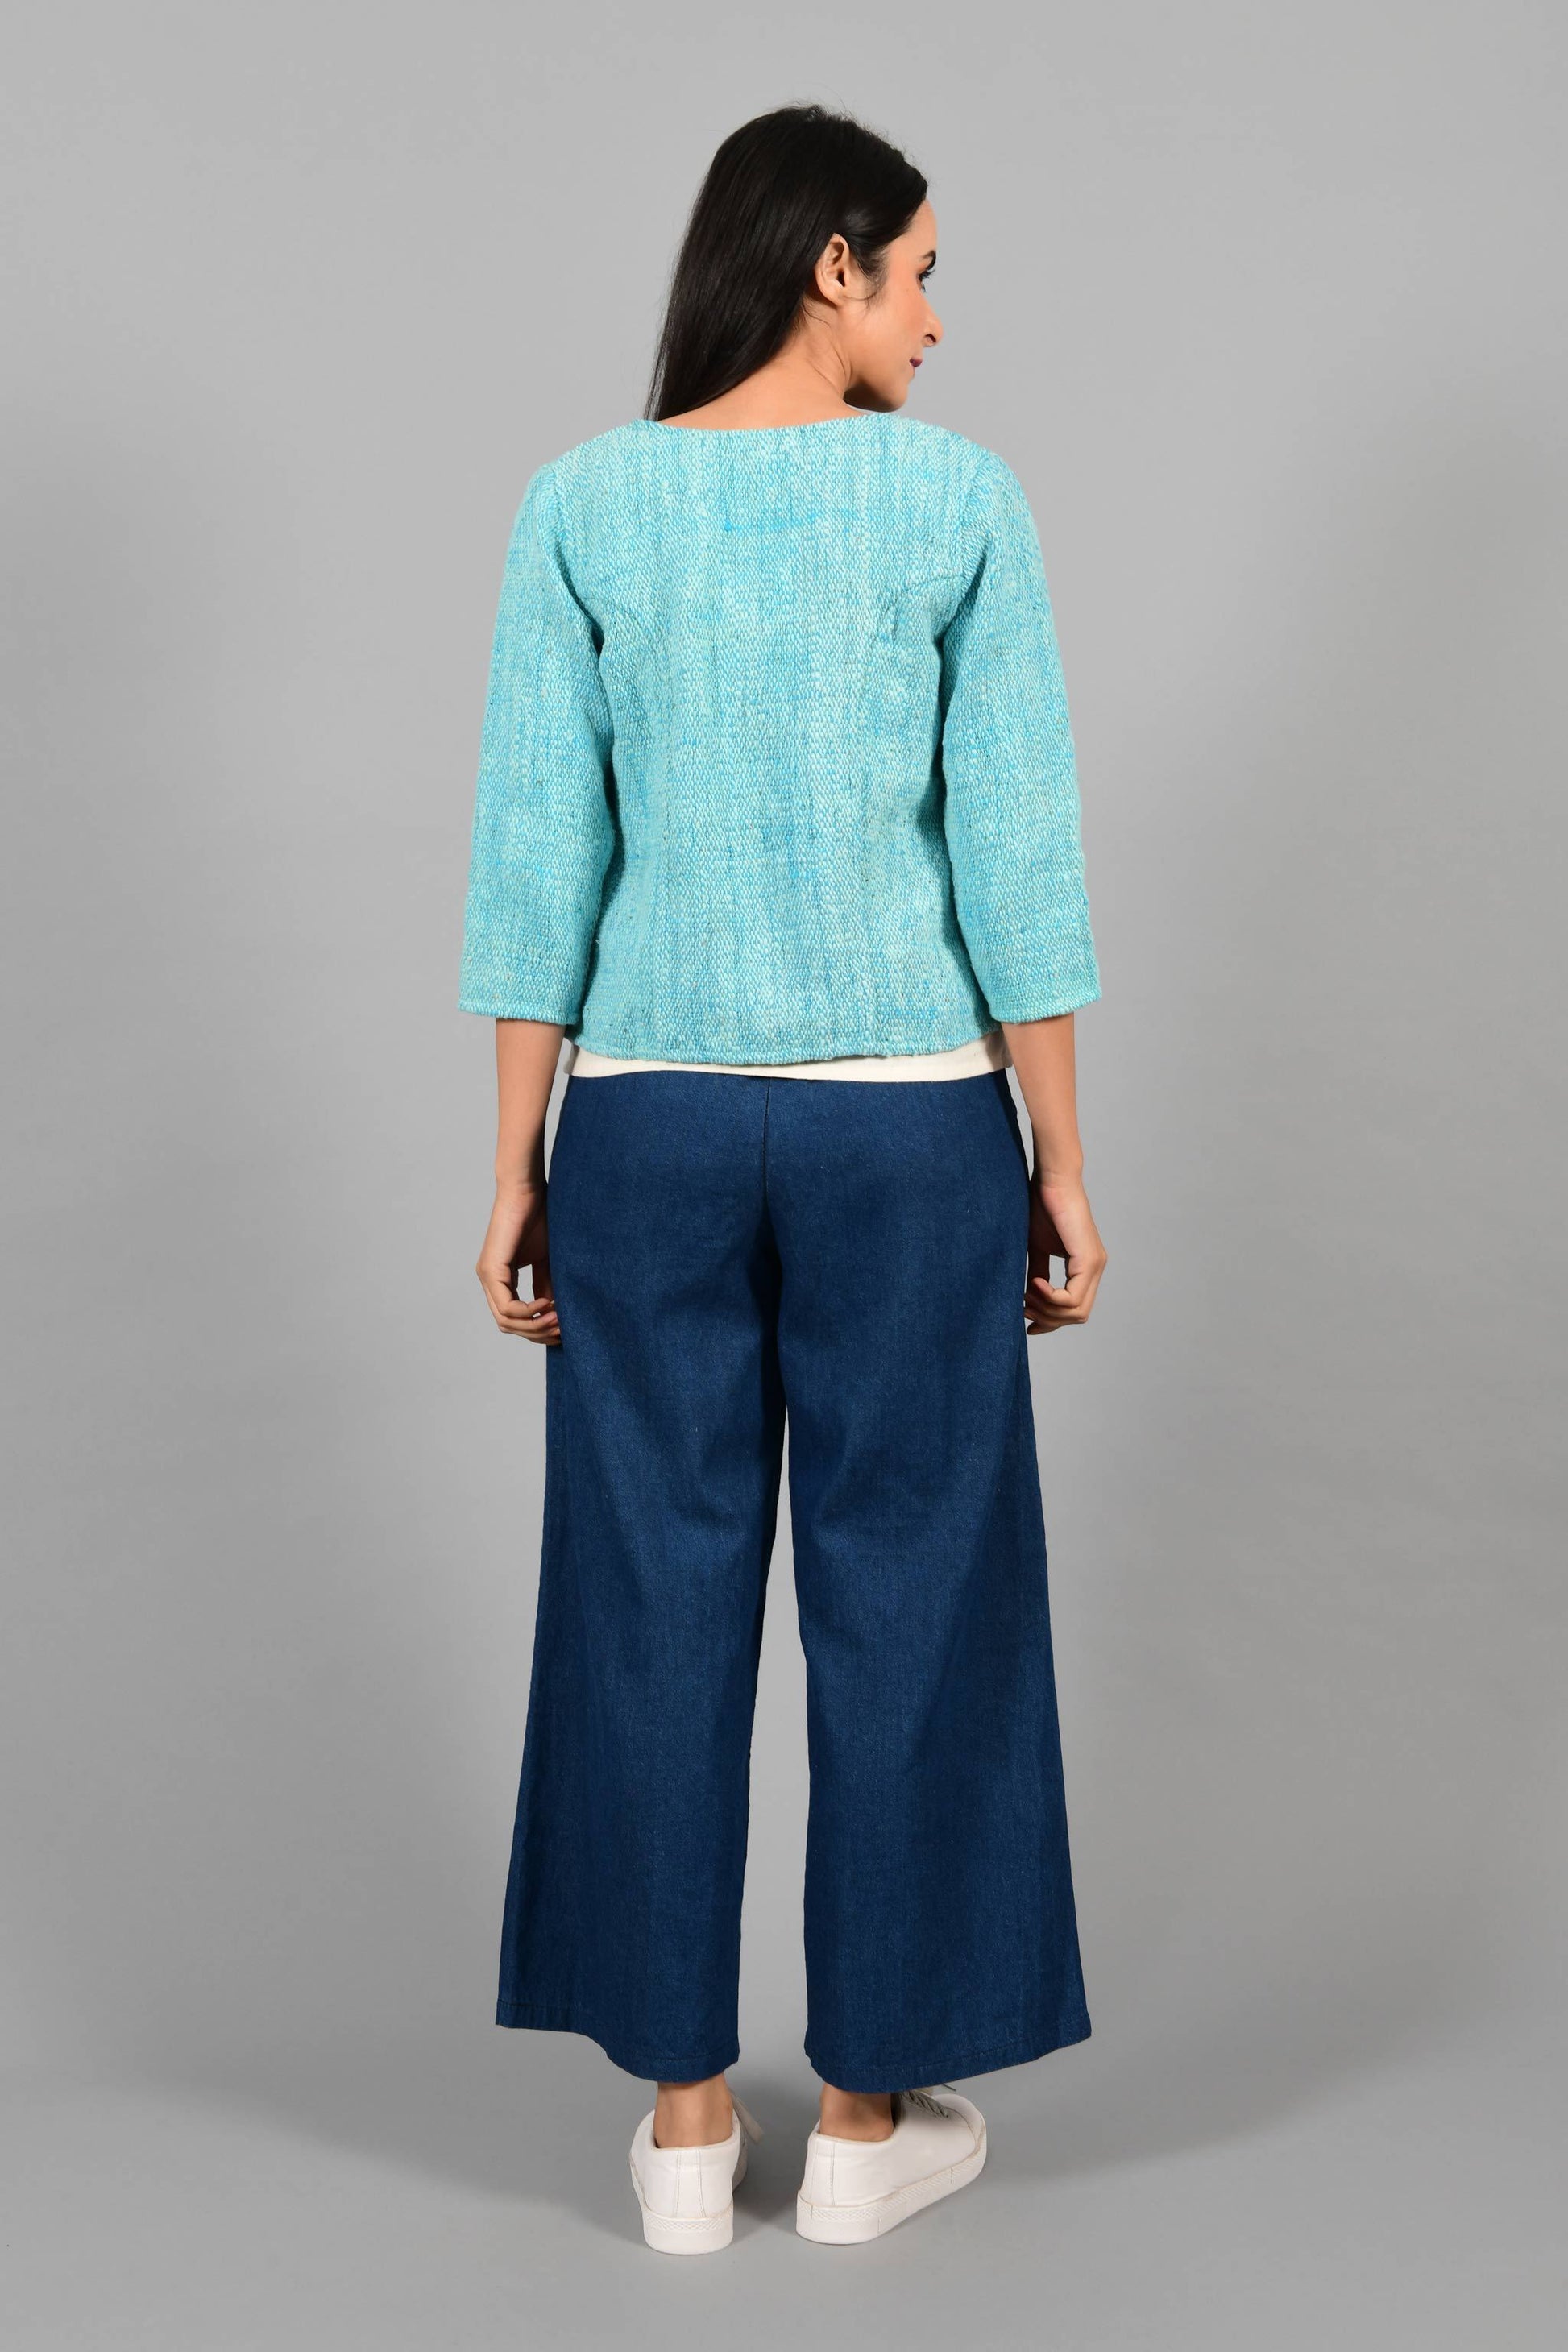 Back pose of an Indian Womenswear female model wearing aqua blue and Gandhi Charkha spun and handwoven khadi Jacket over an off-white spaghetti and indigo palazzos by Cotton Rack.